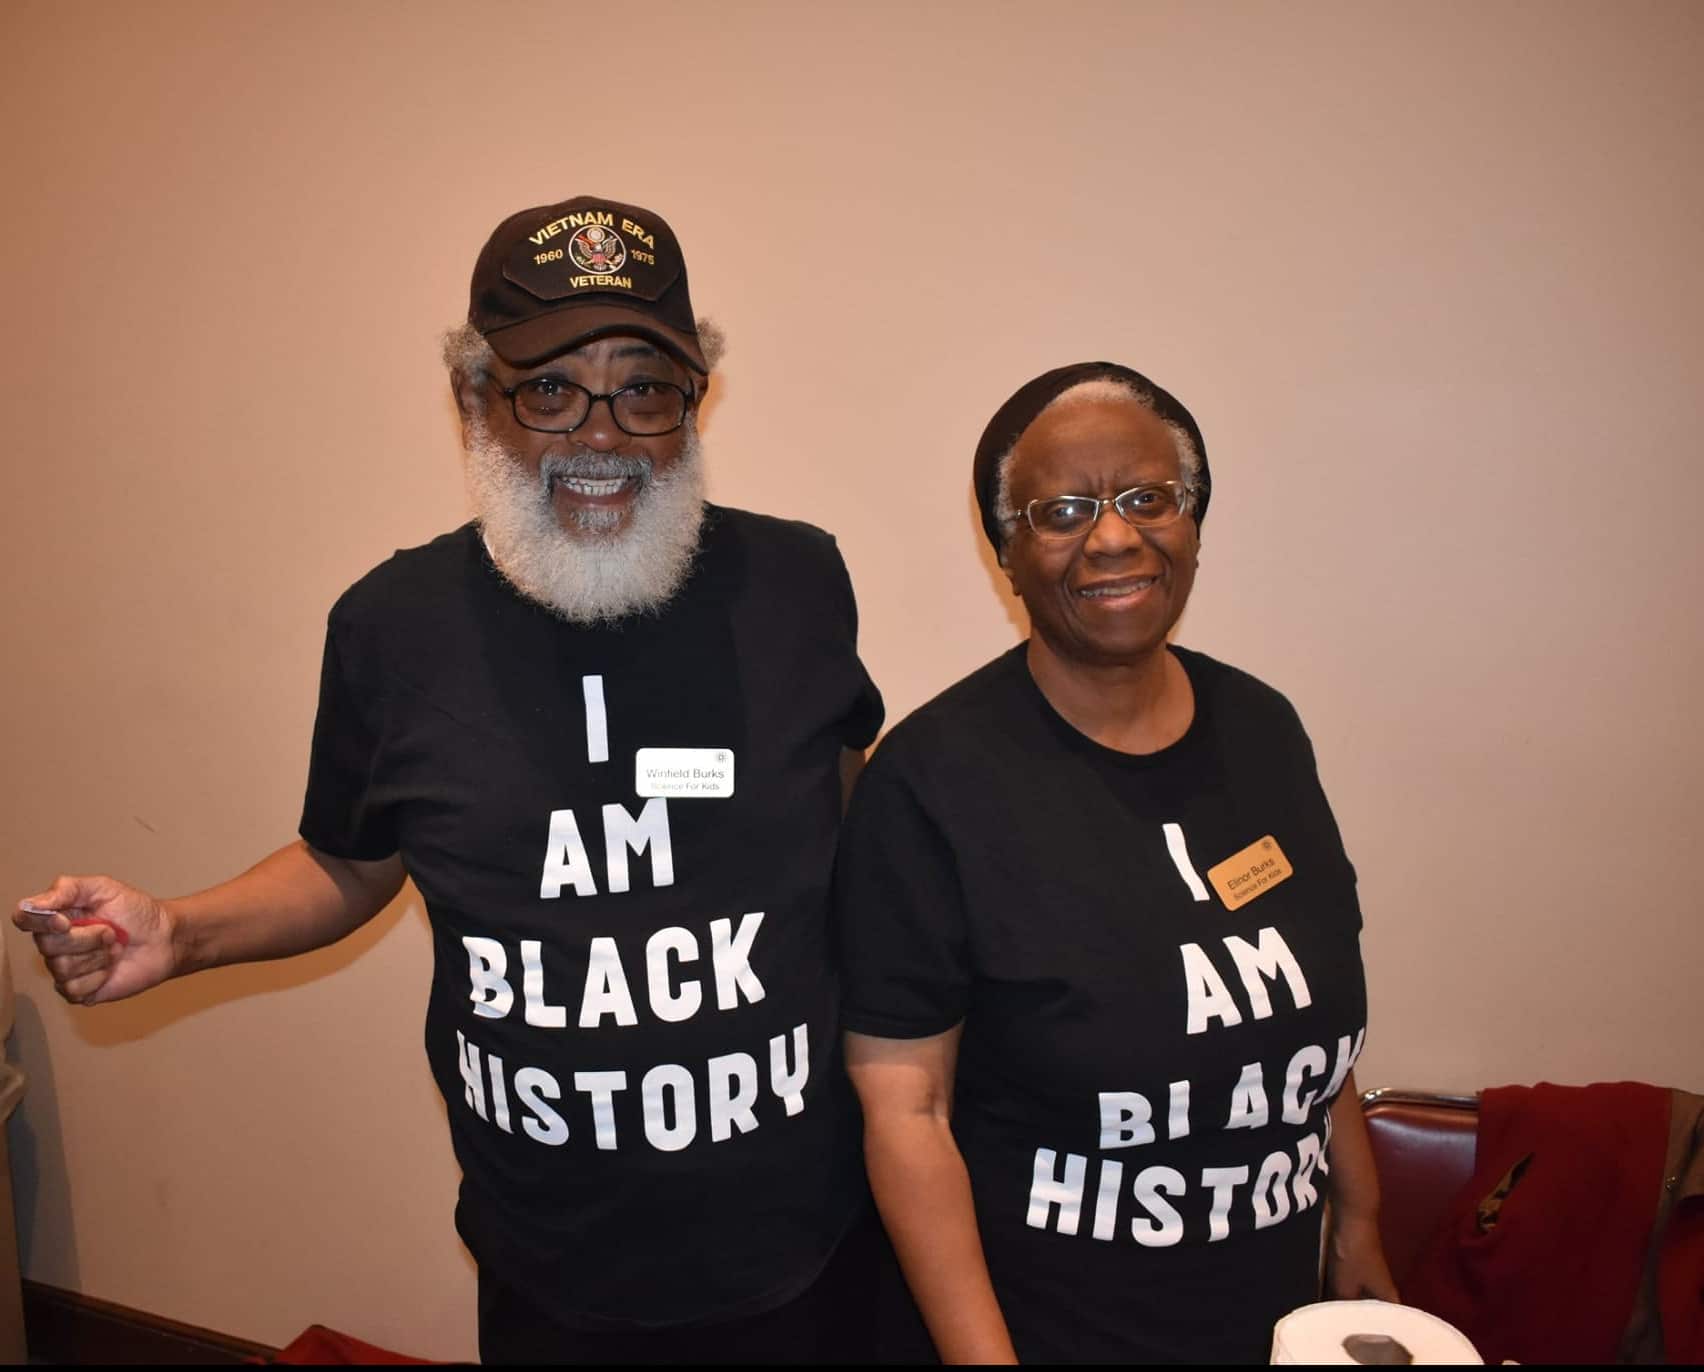 Black History Month event at the Birmingham Public Library